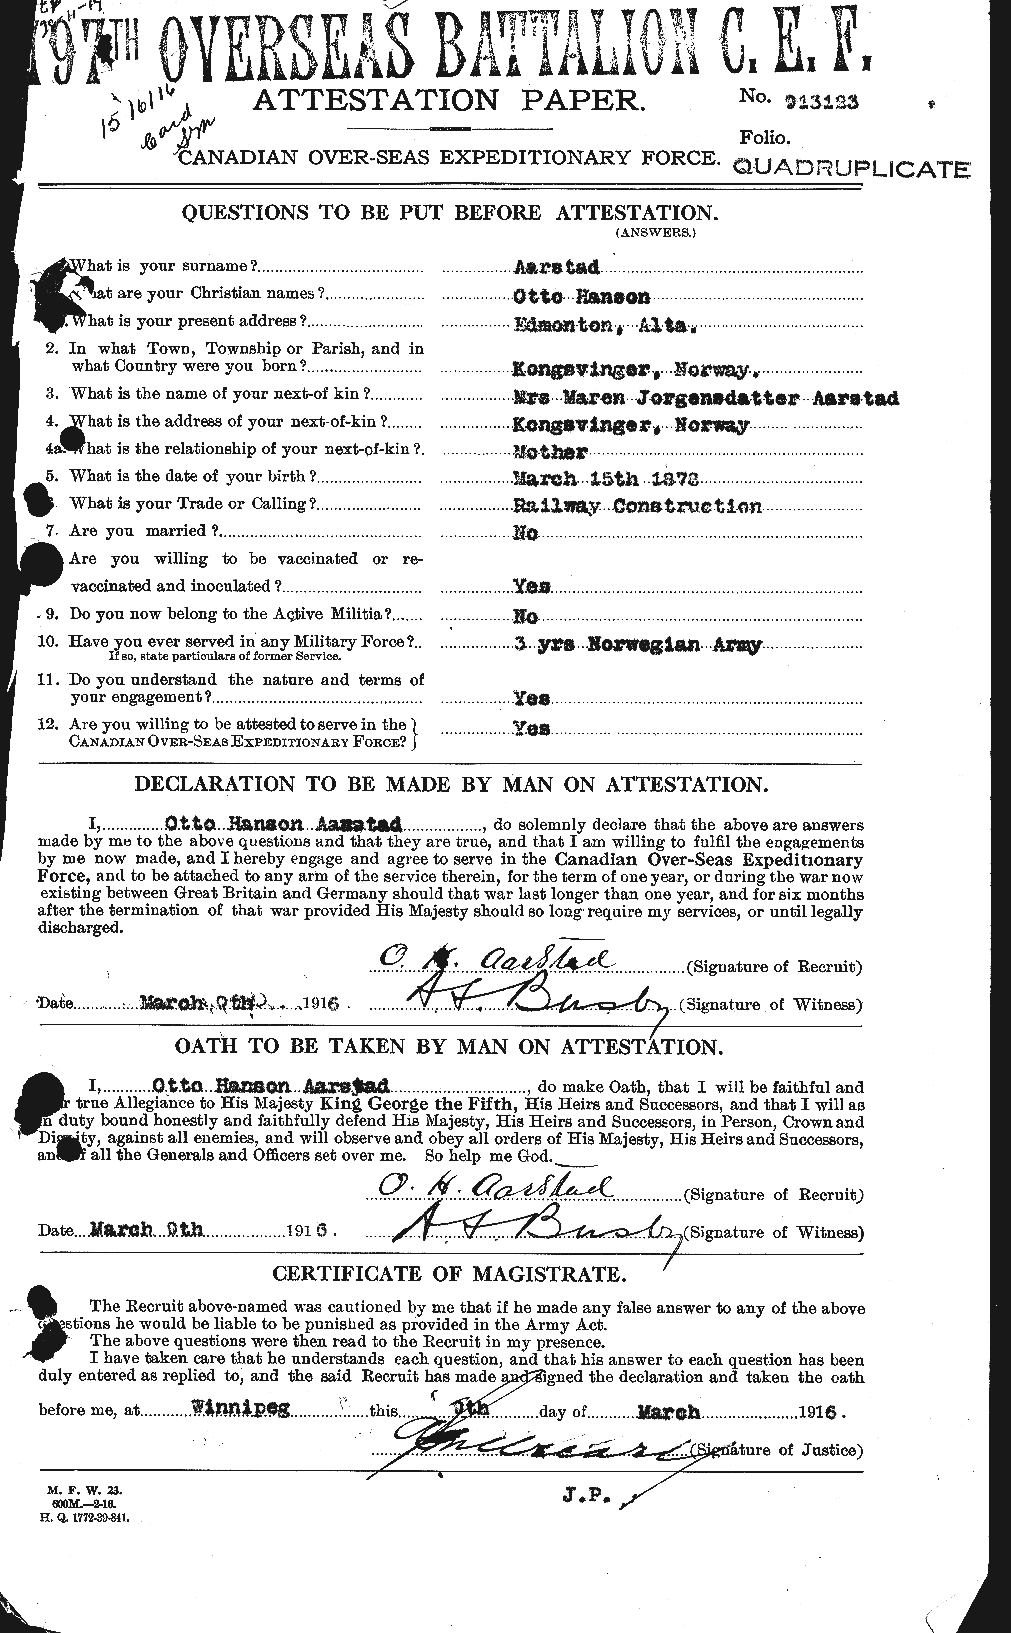 Personnel Records of the First World War - CEF 200752a